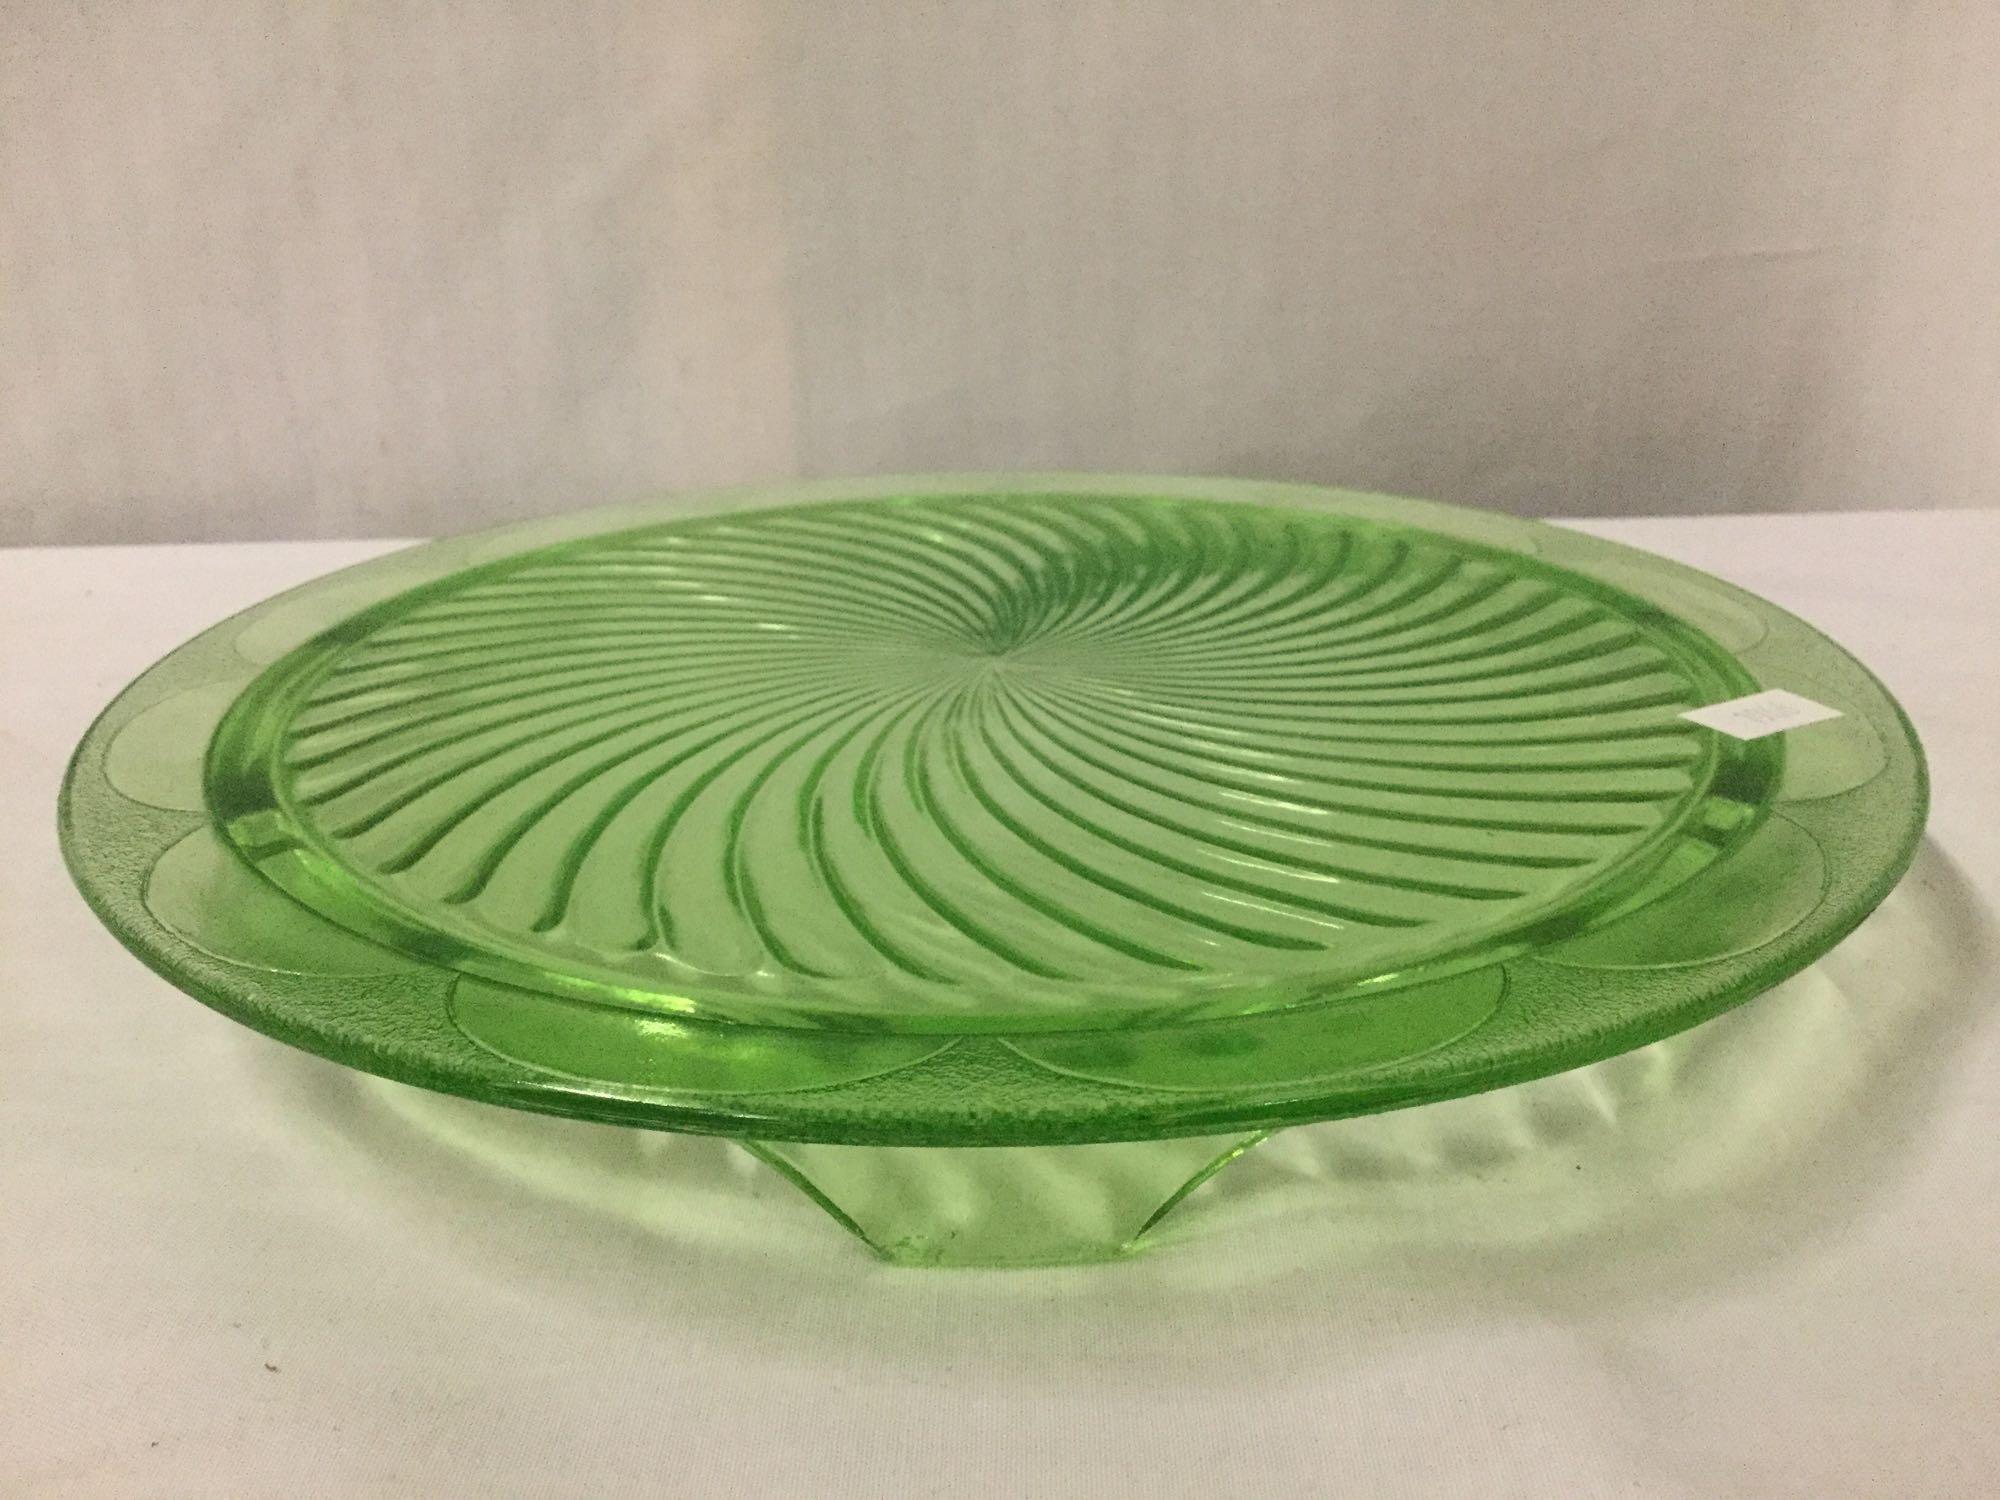 Selection of 3 antique carnival / depression glass incl. Vaseline footed plate & 2 marigold bowls